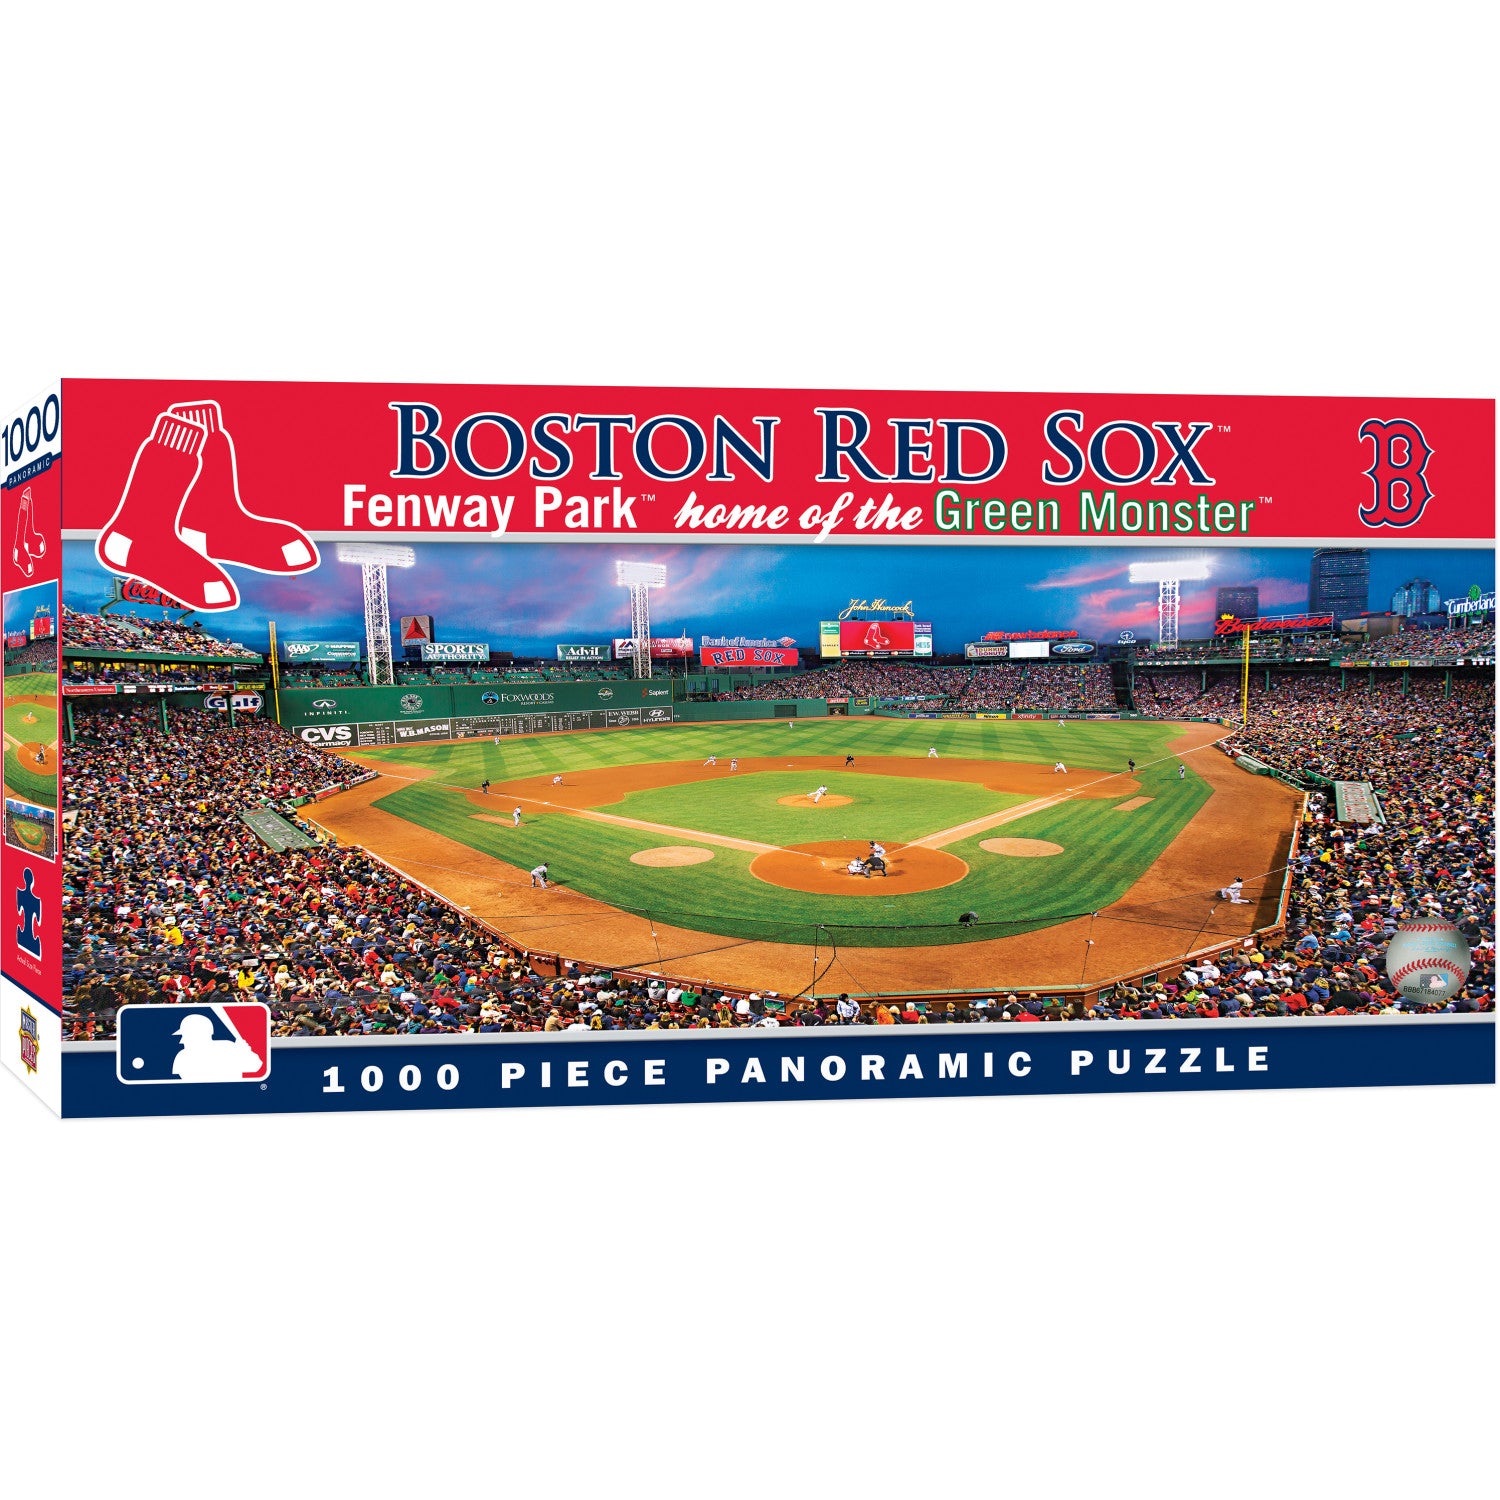 Boston Red Sox - 1000 Piece Panoramic Puzzle